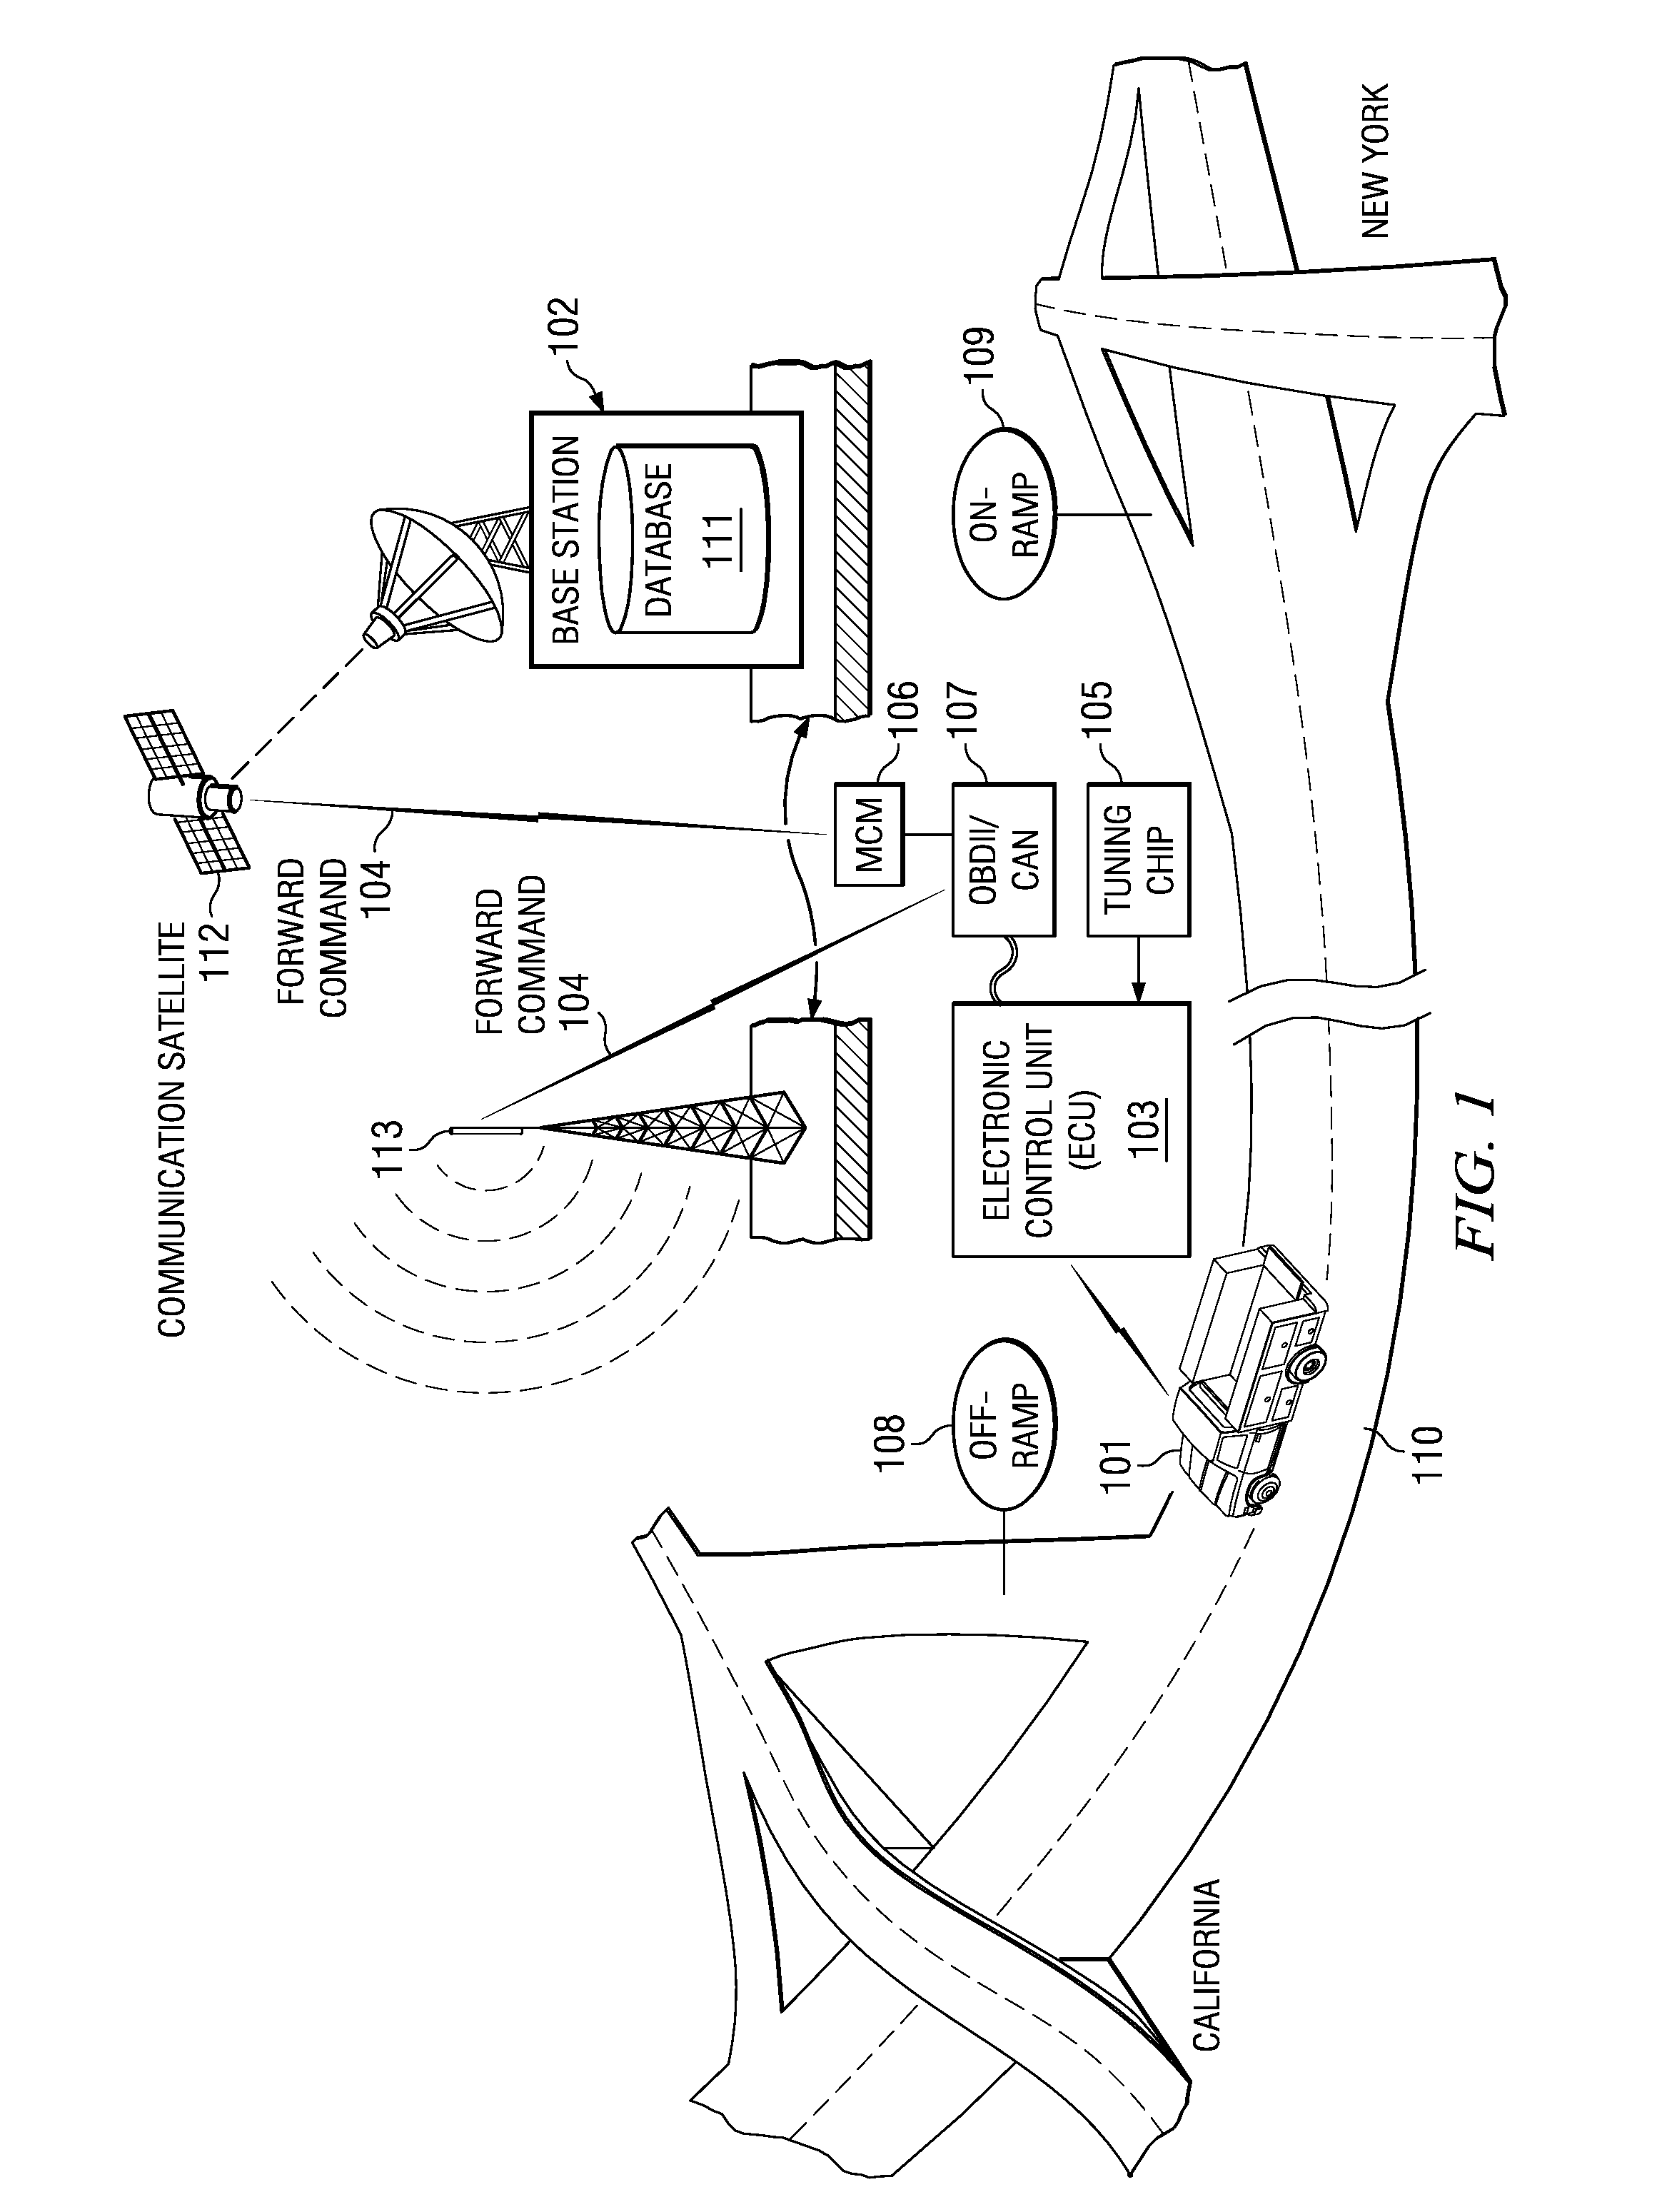 System and method for reconfiguring an electronic control unit of a motor vehicle to optimize fuel economy